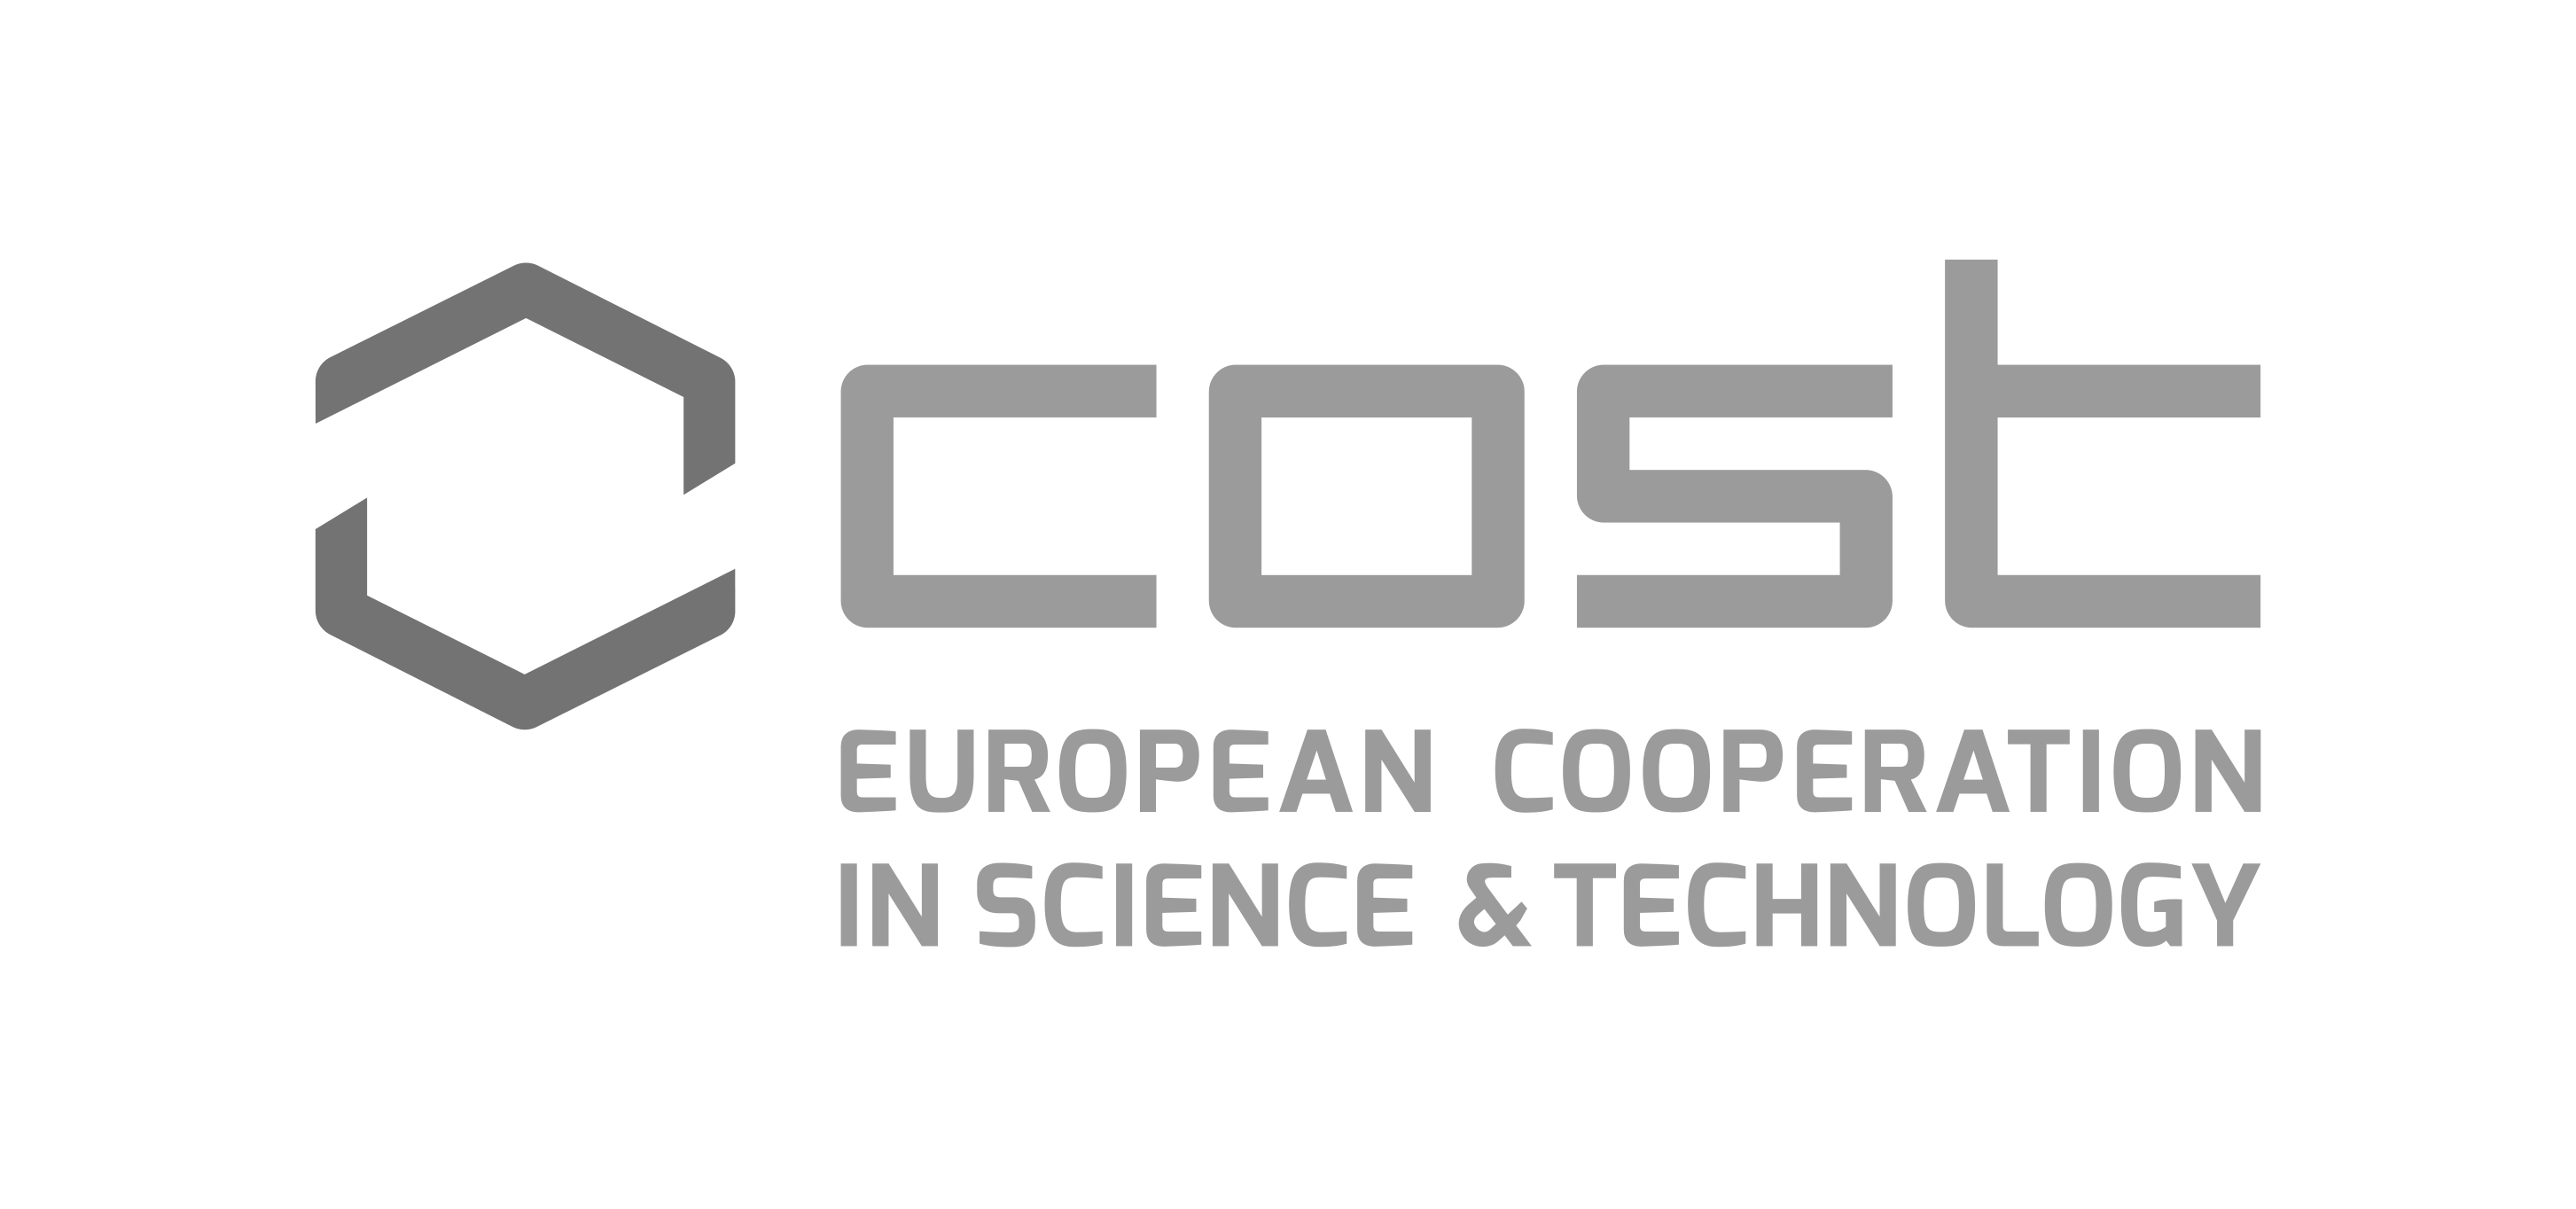 COST (European Cooperation in Science and Technology) is a funding agency for research and innovation networks. Our Actions help connect research initiatives across Europe and enable scientists to grow their ideas by sharing them with their peers. This boosts their research, career and innovation.